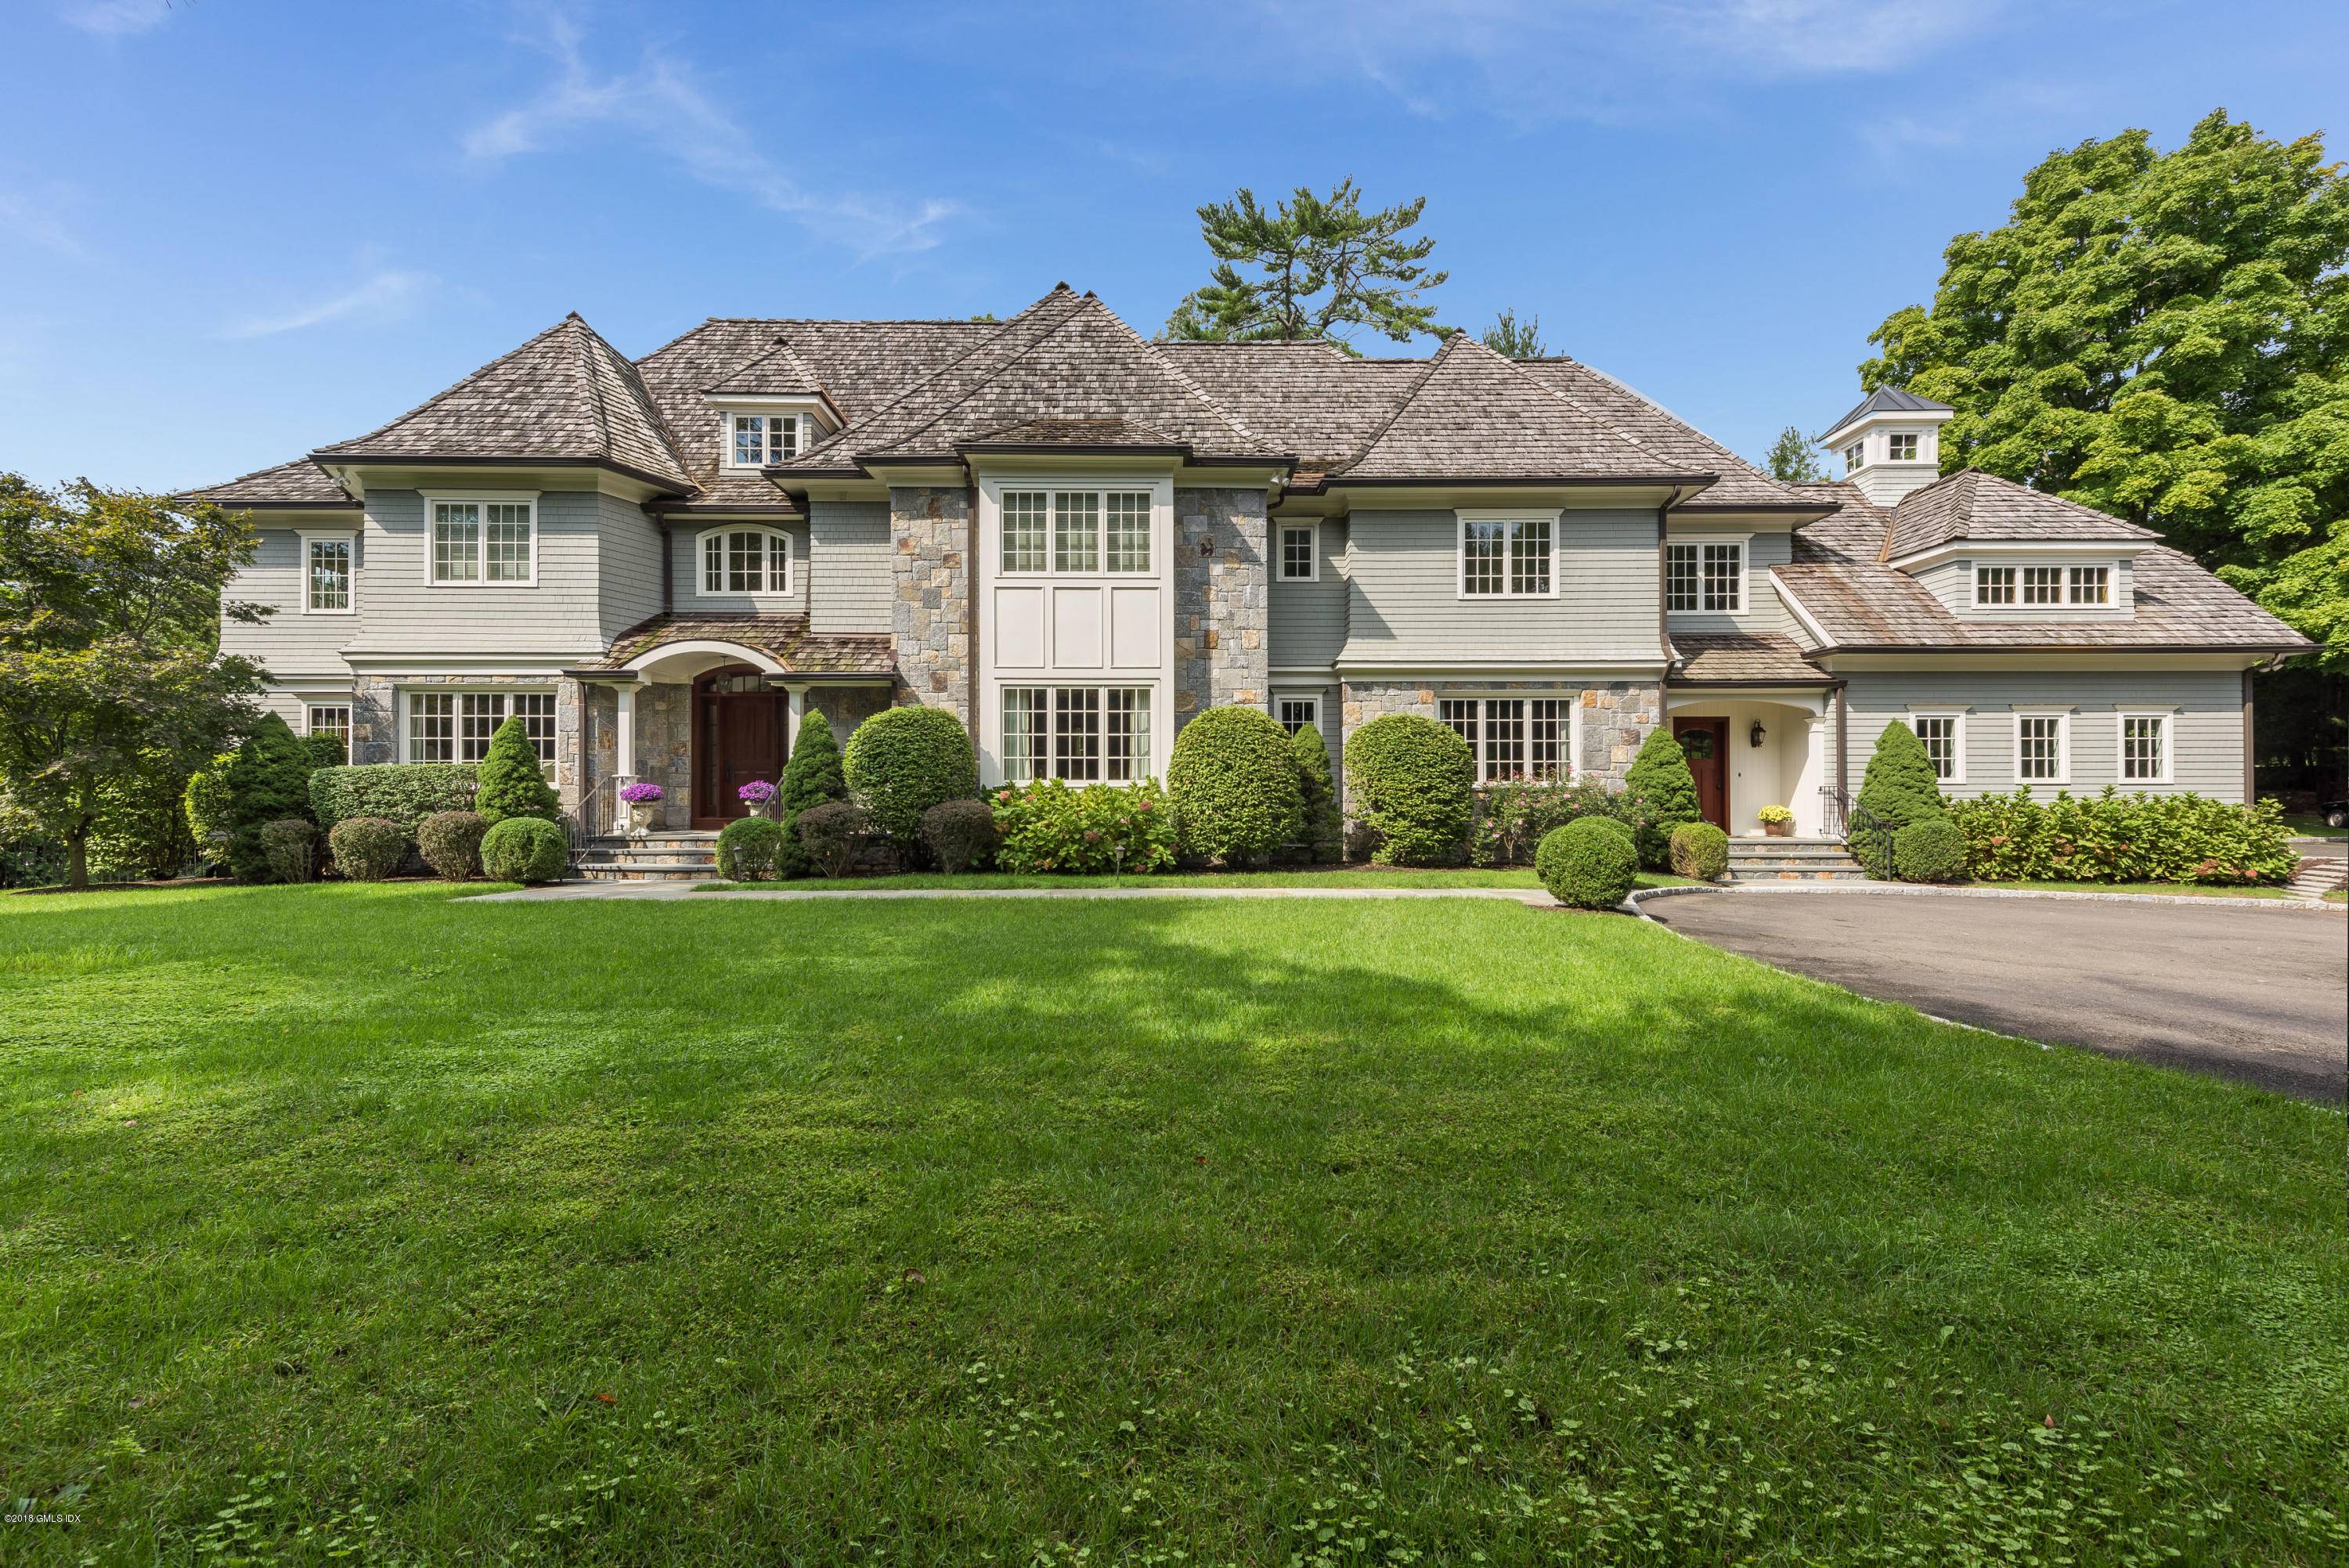 Classic elegance defines this sundrenched four five bedroom home poised on a 1.